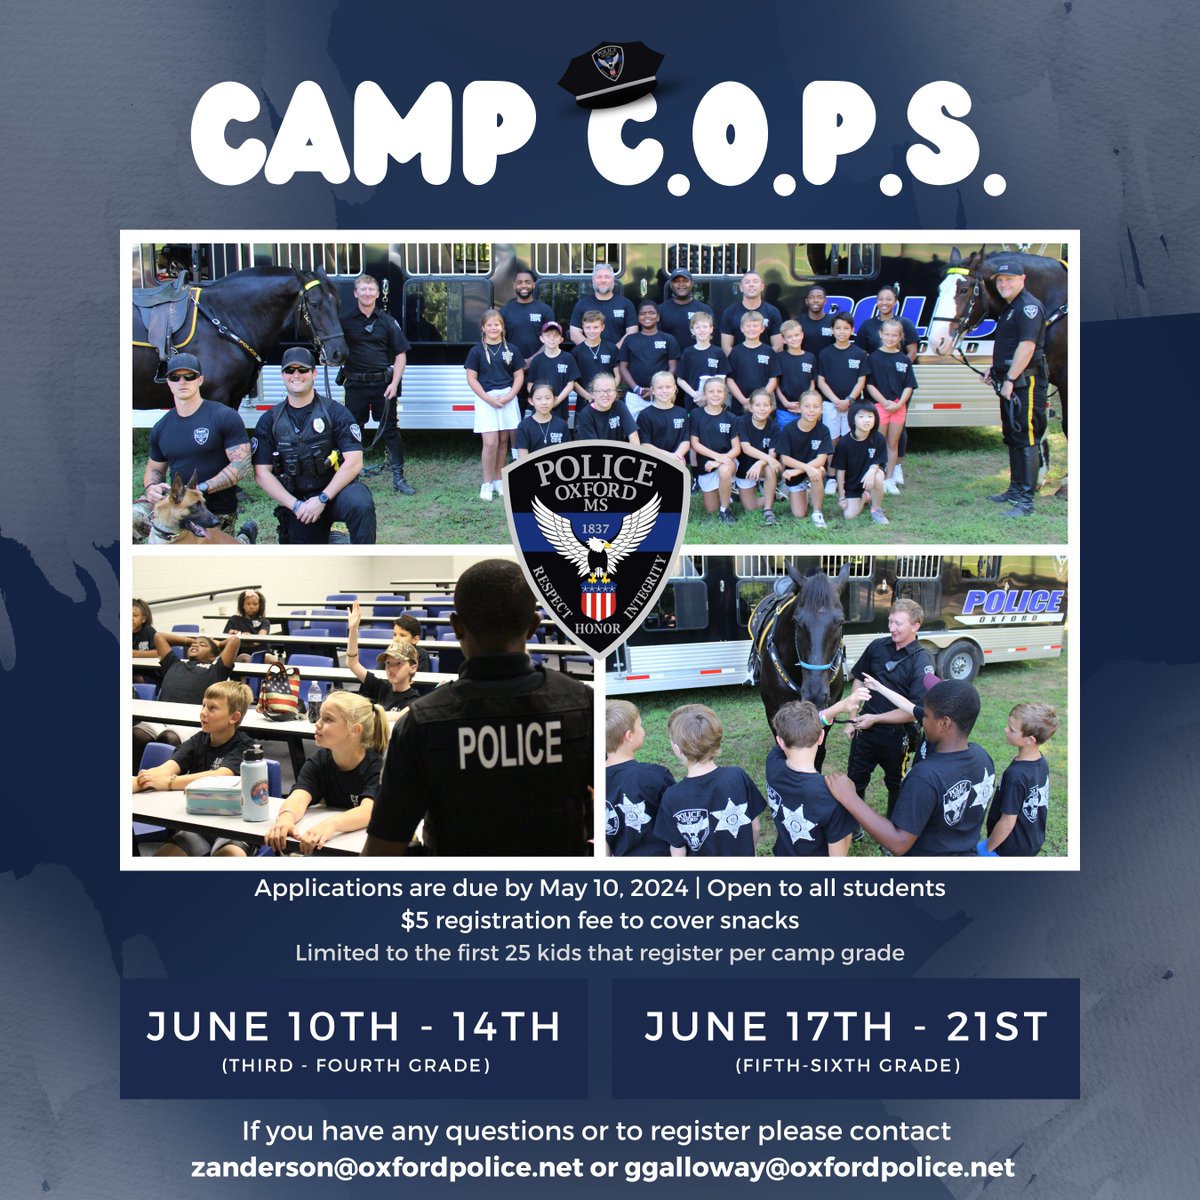 🚔 Calling the future of OPD.🚔 Calling all future crime-stoppers! Applications for Camp Cops are open now! Don't miss out on this incredible summer experience filled with fun, learning, and adventure. Apply by May 10th to secure your spot in our youth program. ☀️👮‍♂️ #CampCops